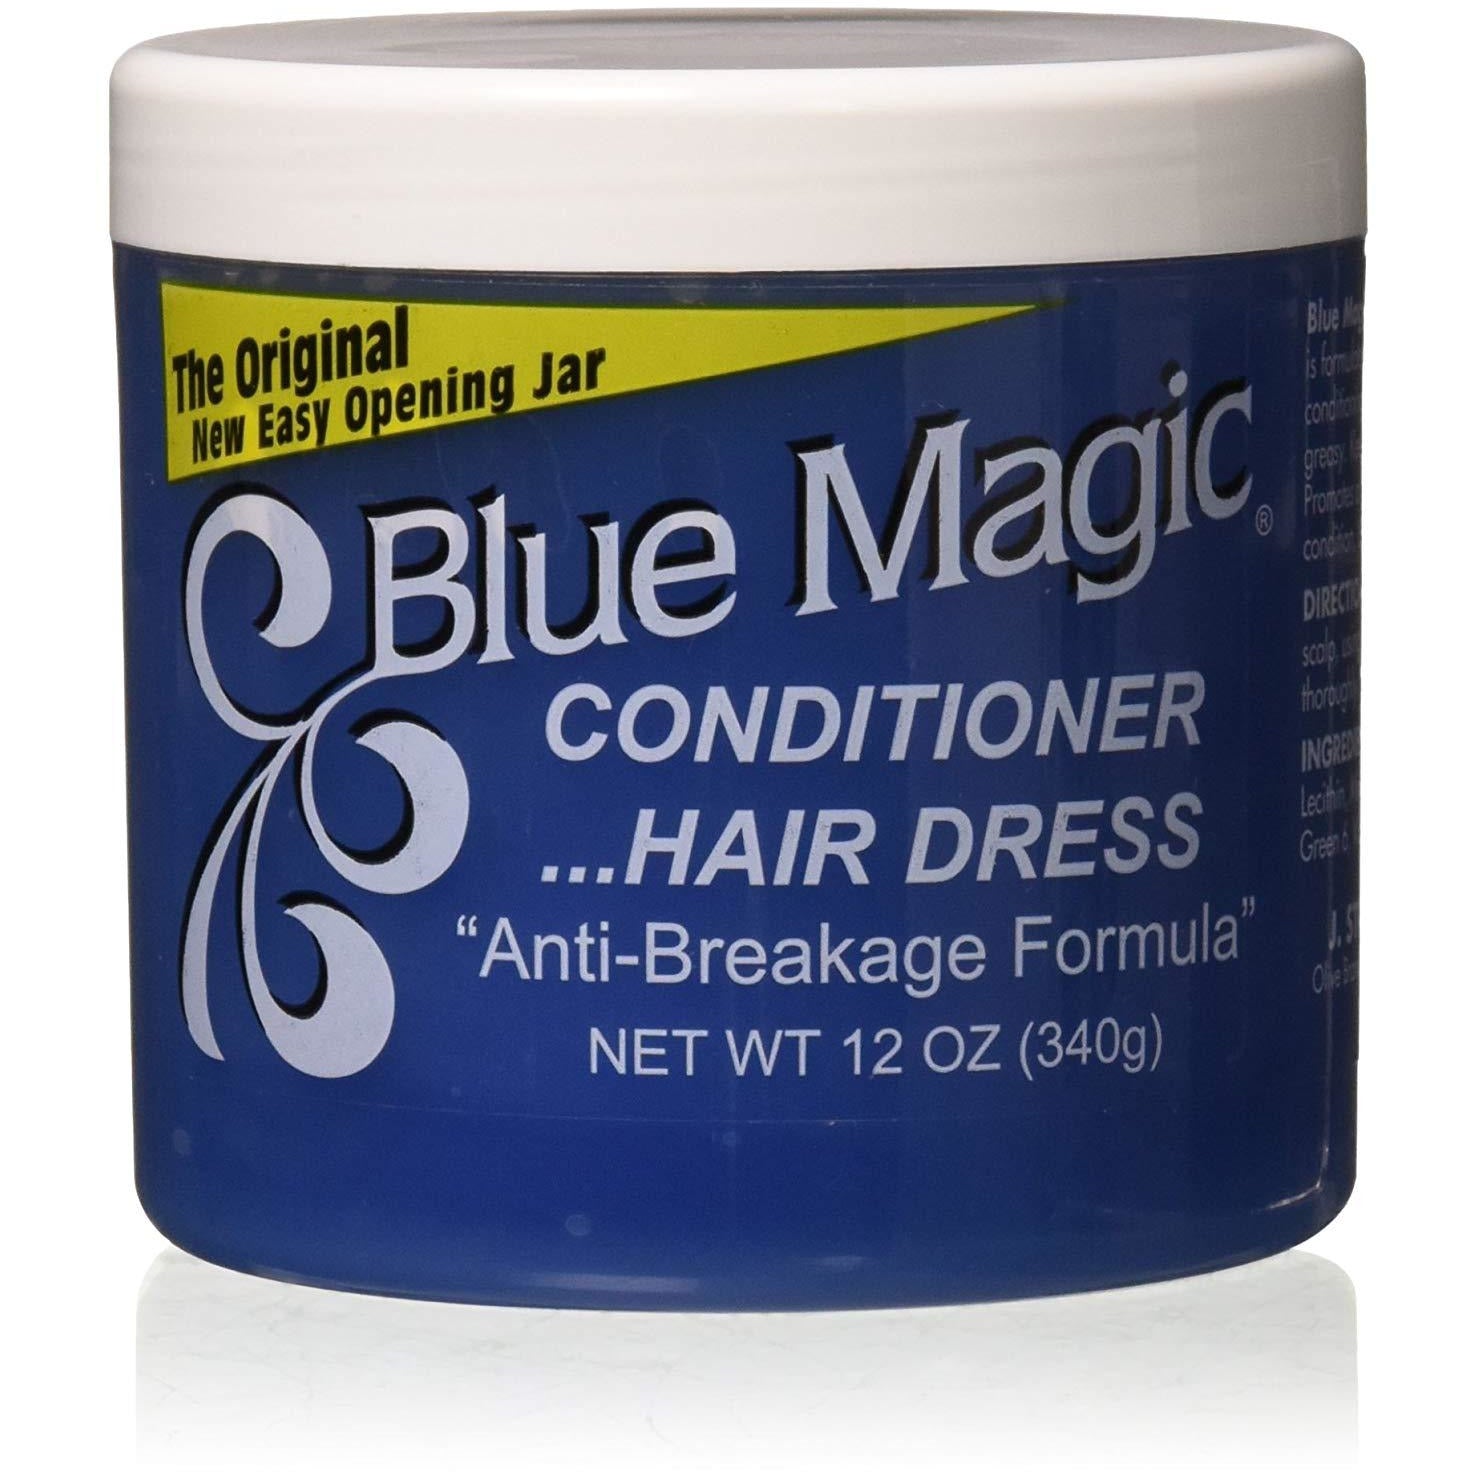 Blue Magic Conditioner Hair Dress 15 pack - 4th Ave Market